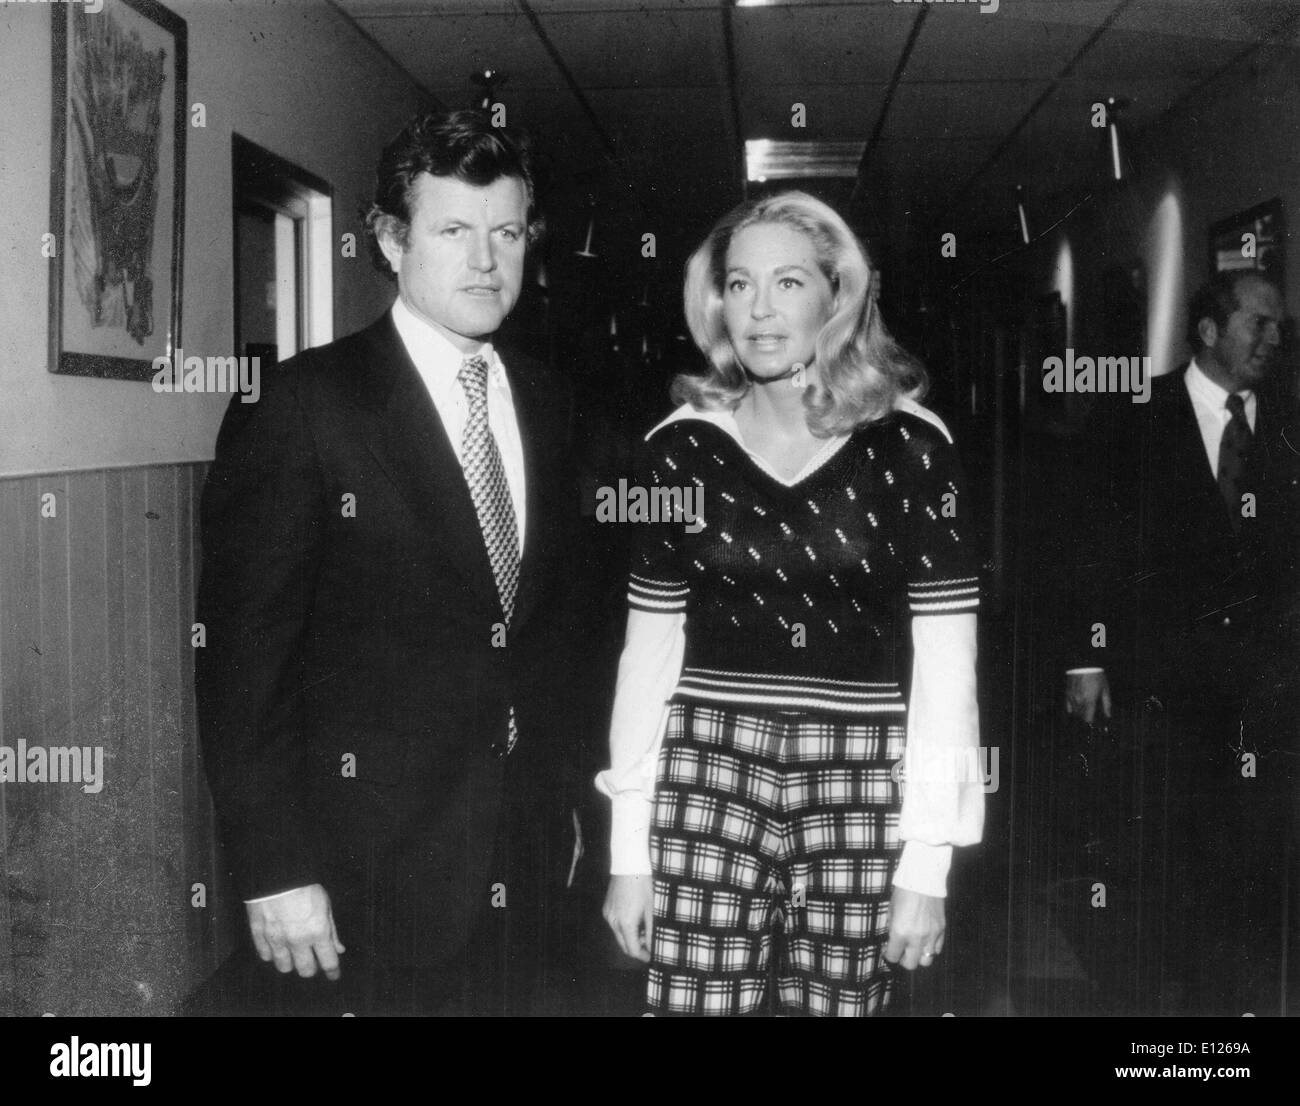 Dec 27, 2006; Boston, MA, USA; TED KENNEDY with wife JOAN. The Kennedy family is a prominent Irish-American family in American politics and government descending from the marriage of JOSEPH P. KENNEDY and ROSE FITZGERALD KENNEDY. The predominantly Democratic family is known for its US-style political liberalism. The best known Kennedy is the late President of the United States John F. Kennedy. The Kennedys are often compared to the Adams, Bush, and Taft families as among the most influential American political families Stock Photo